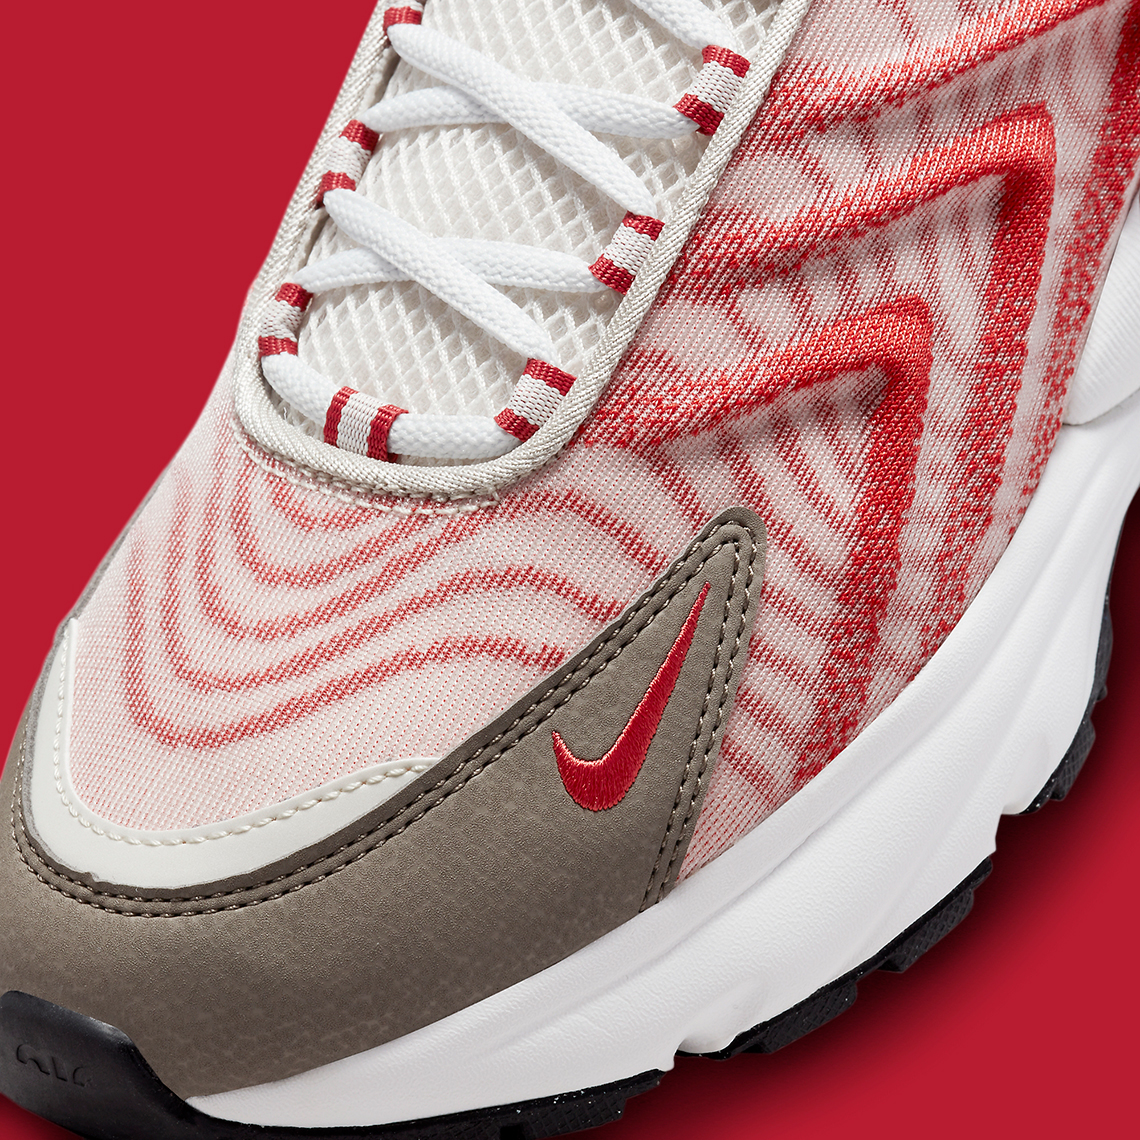 Nike Air Max TW Red White DQ3984-002 | SneakerNews.com